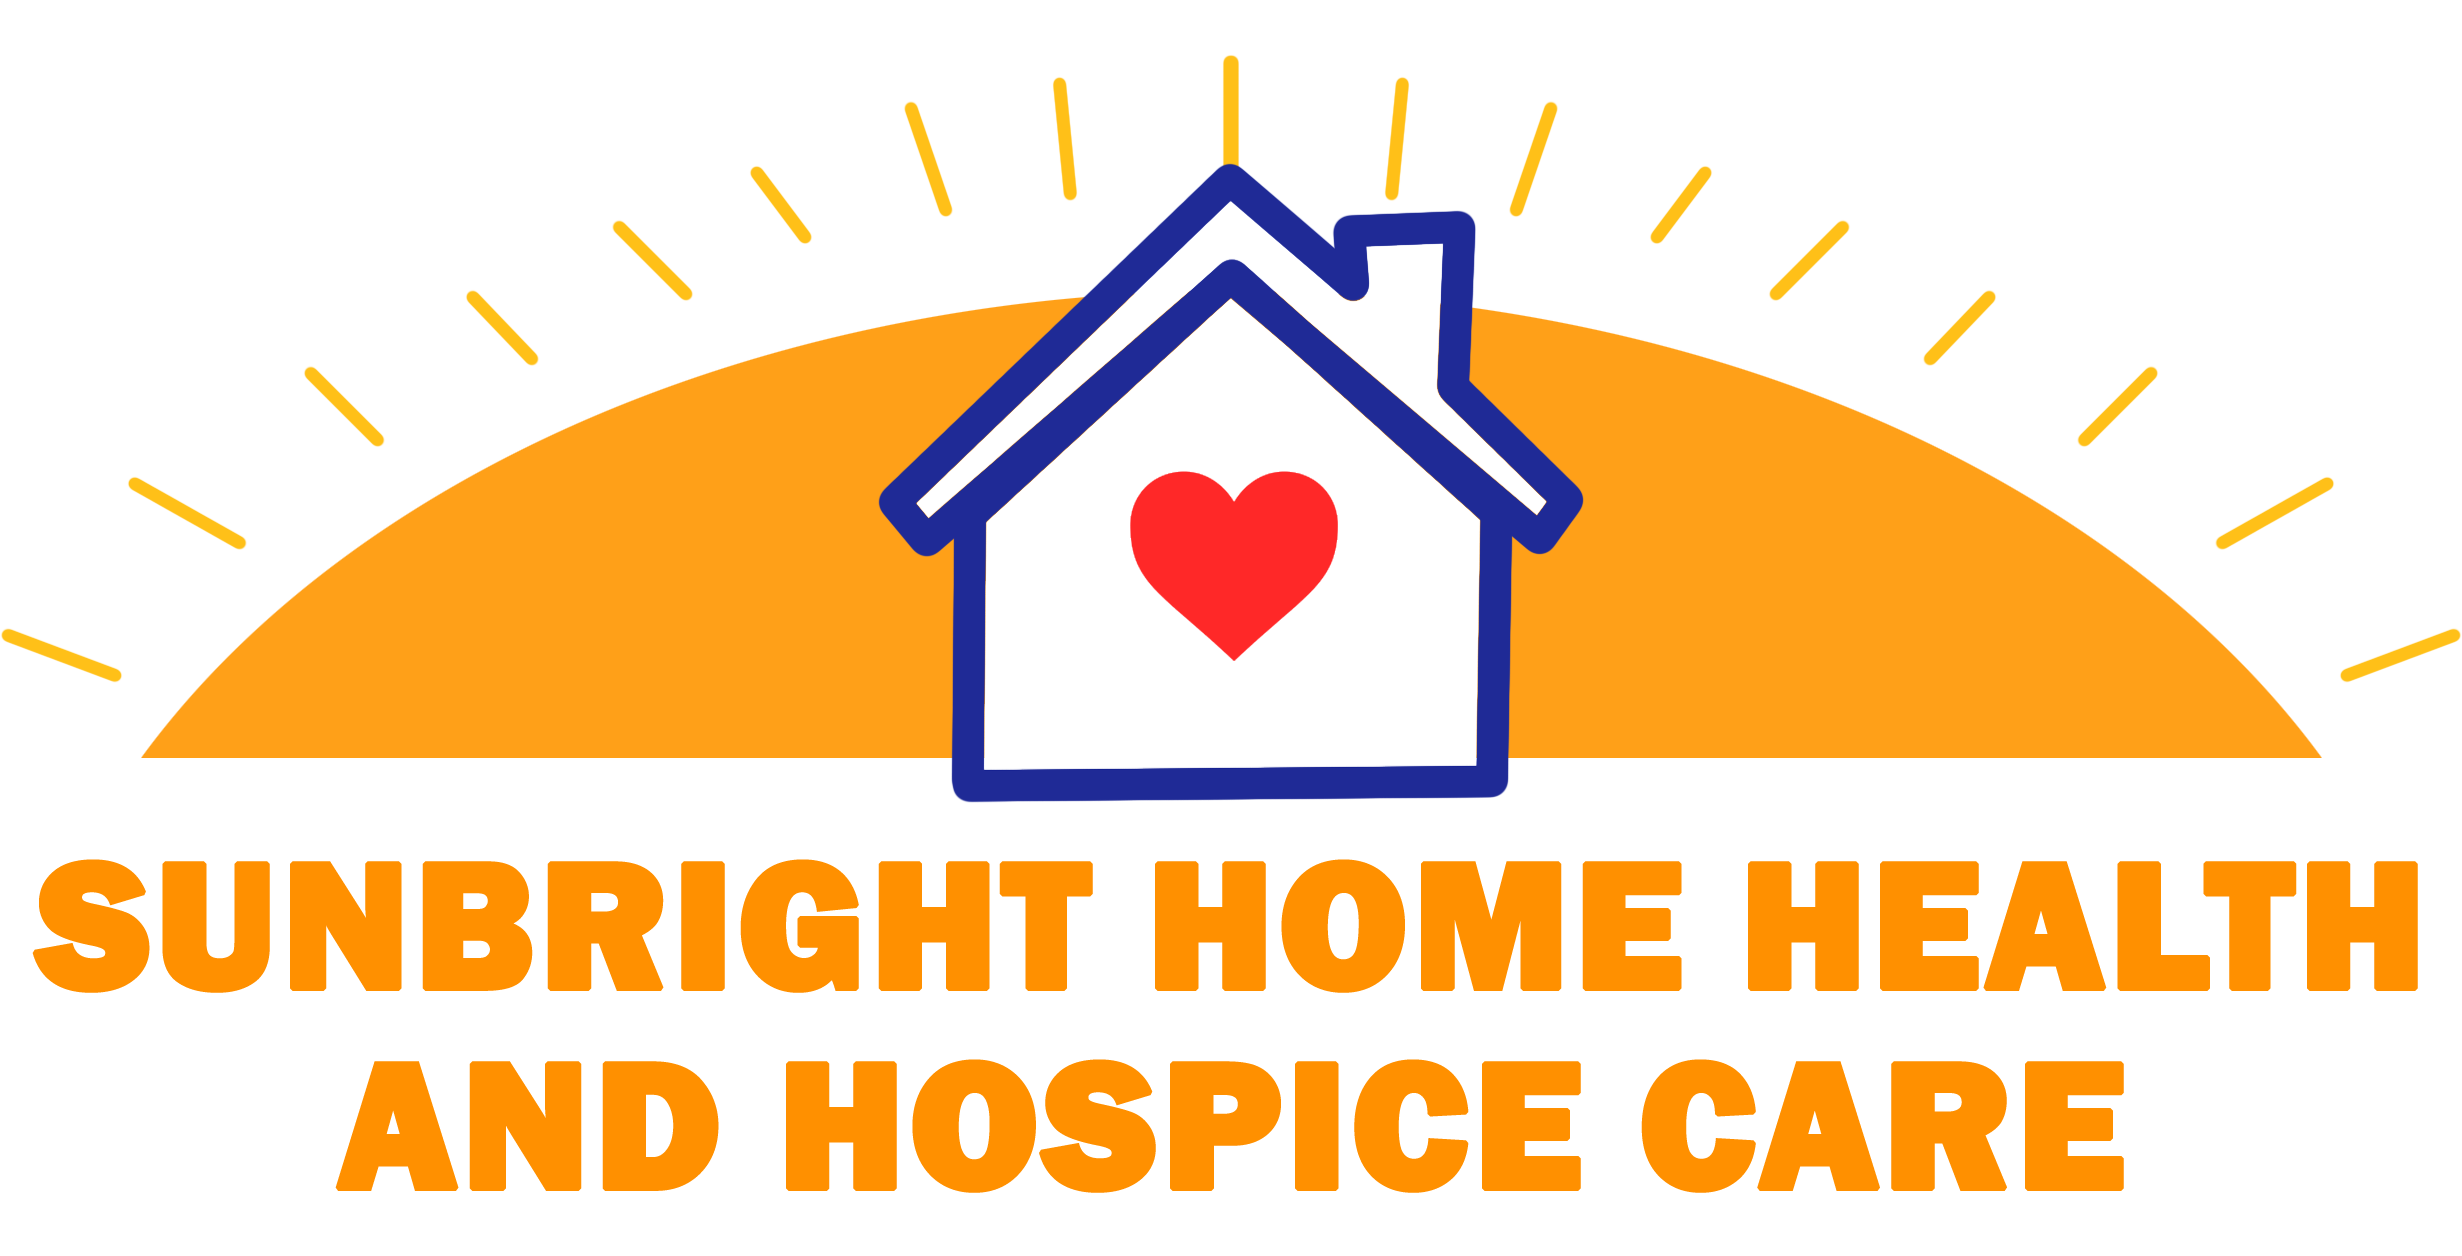 SunBright Home Health And Hospice Care